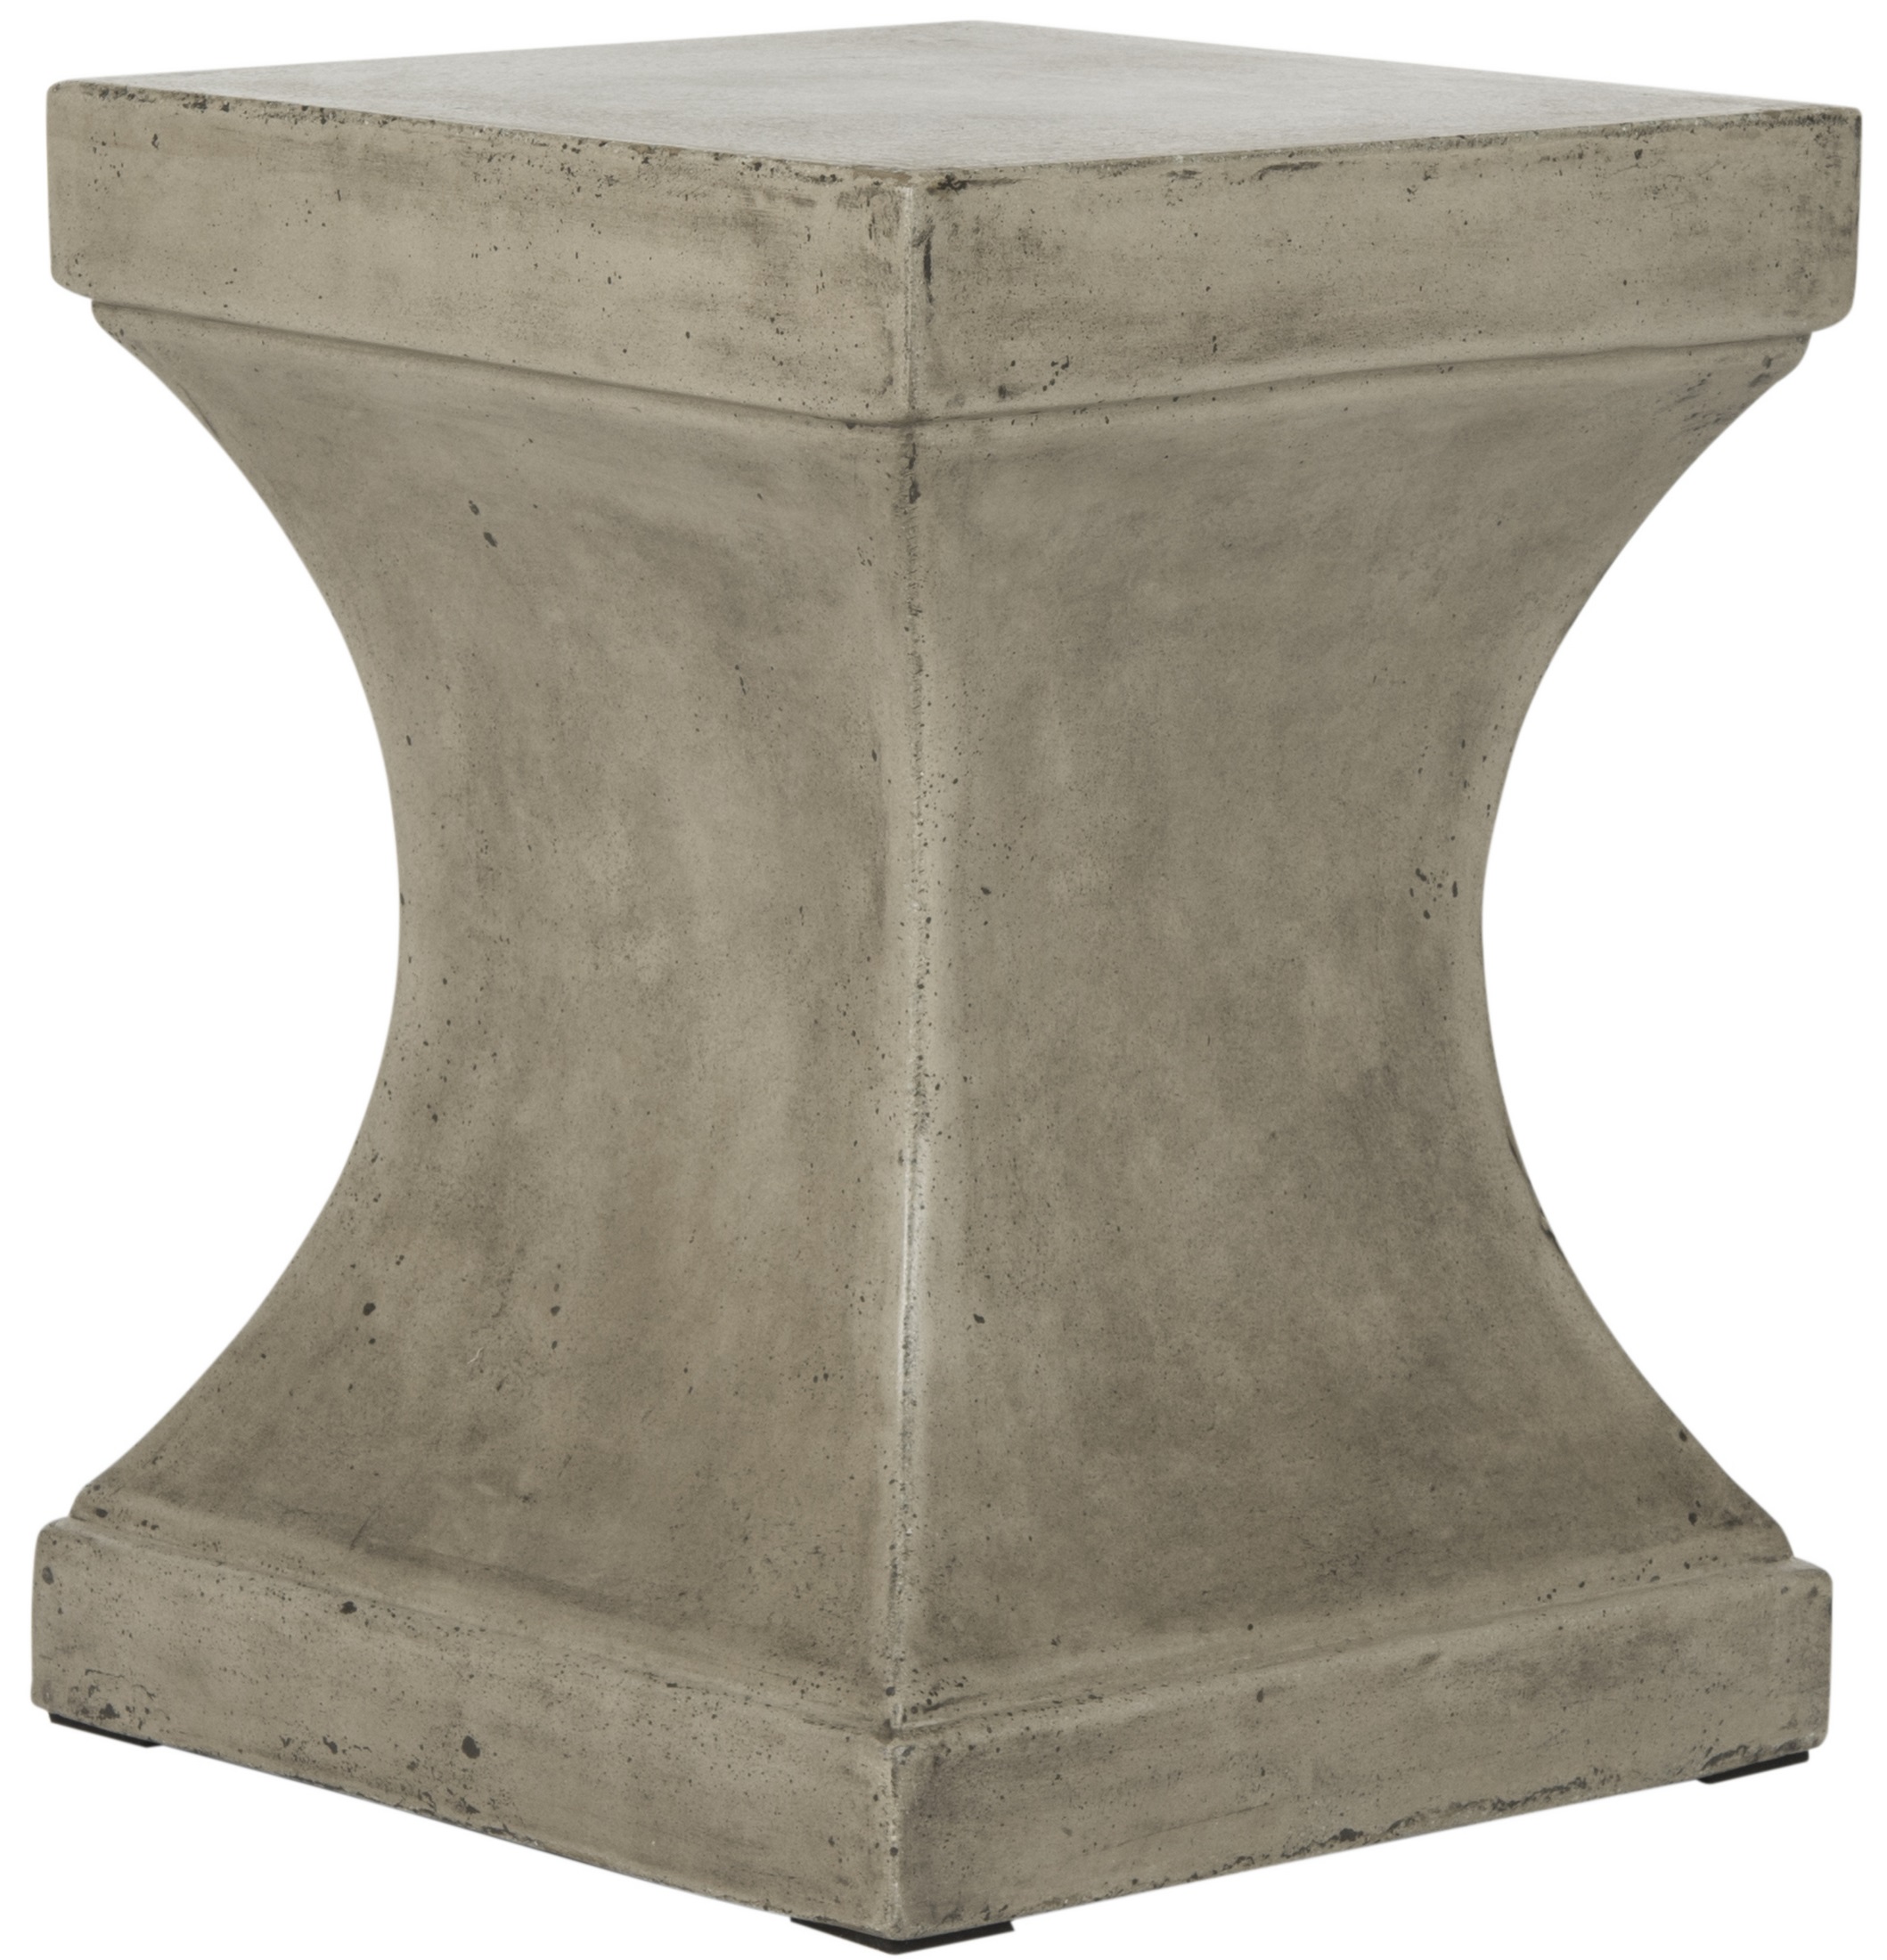 Safavieh Curby Outdoor Modern Concrete Accent Table - Dark Grey - image 3 of 5